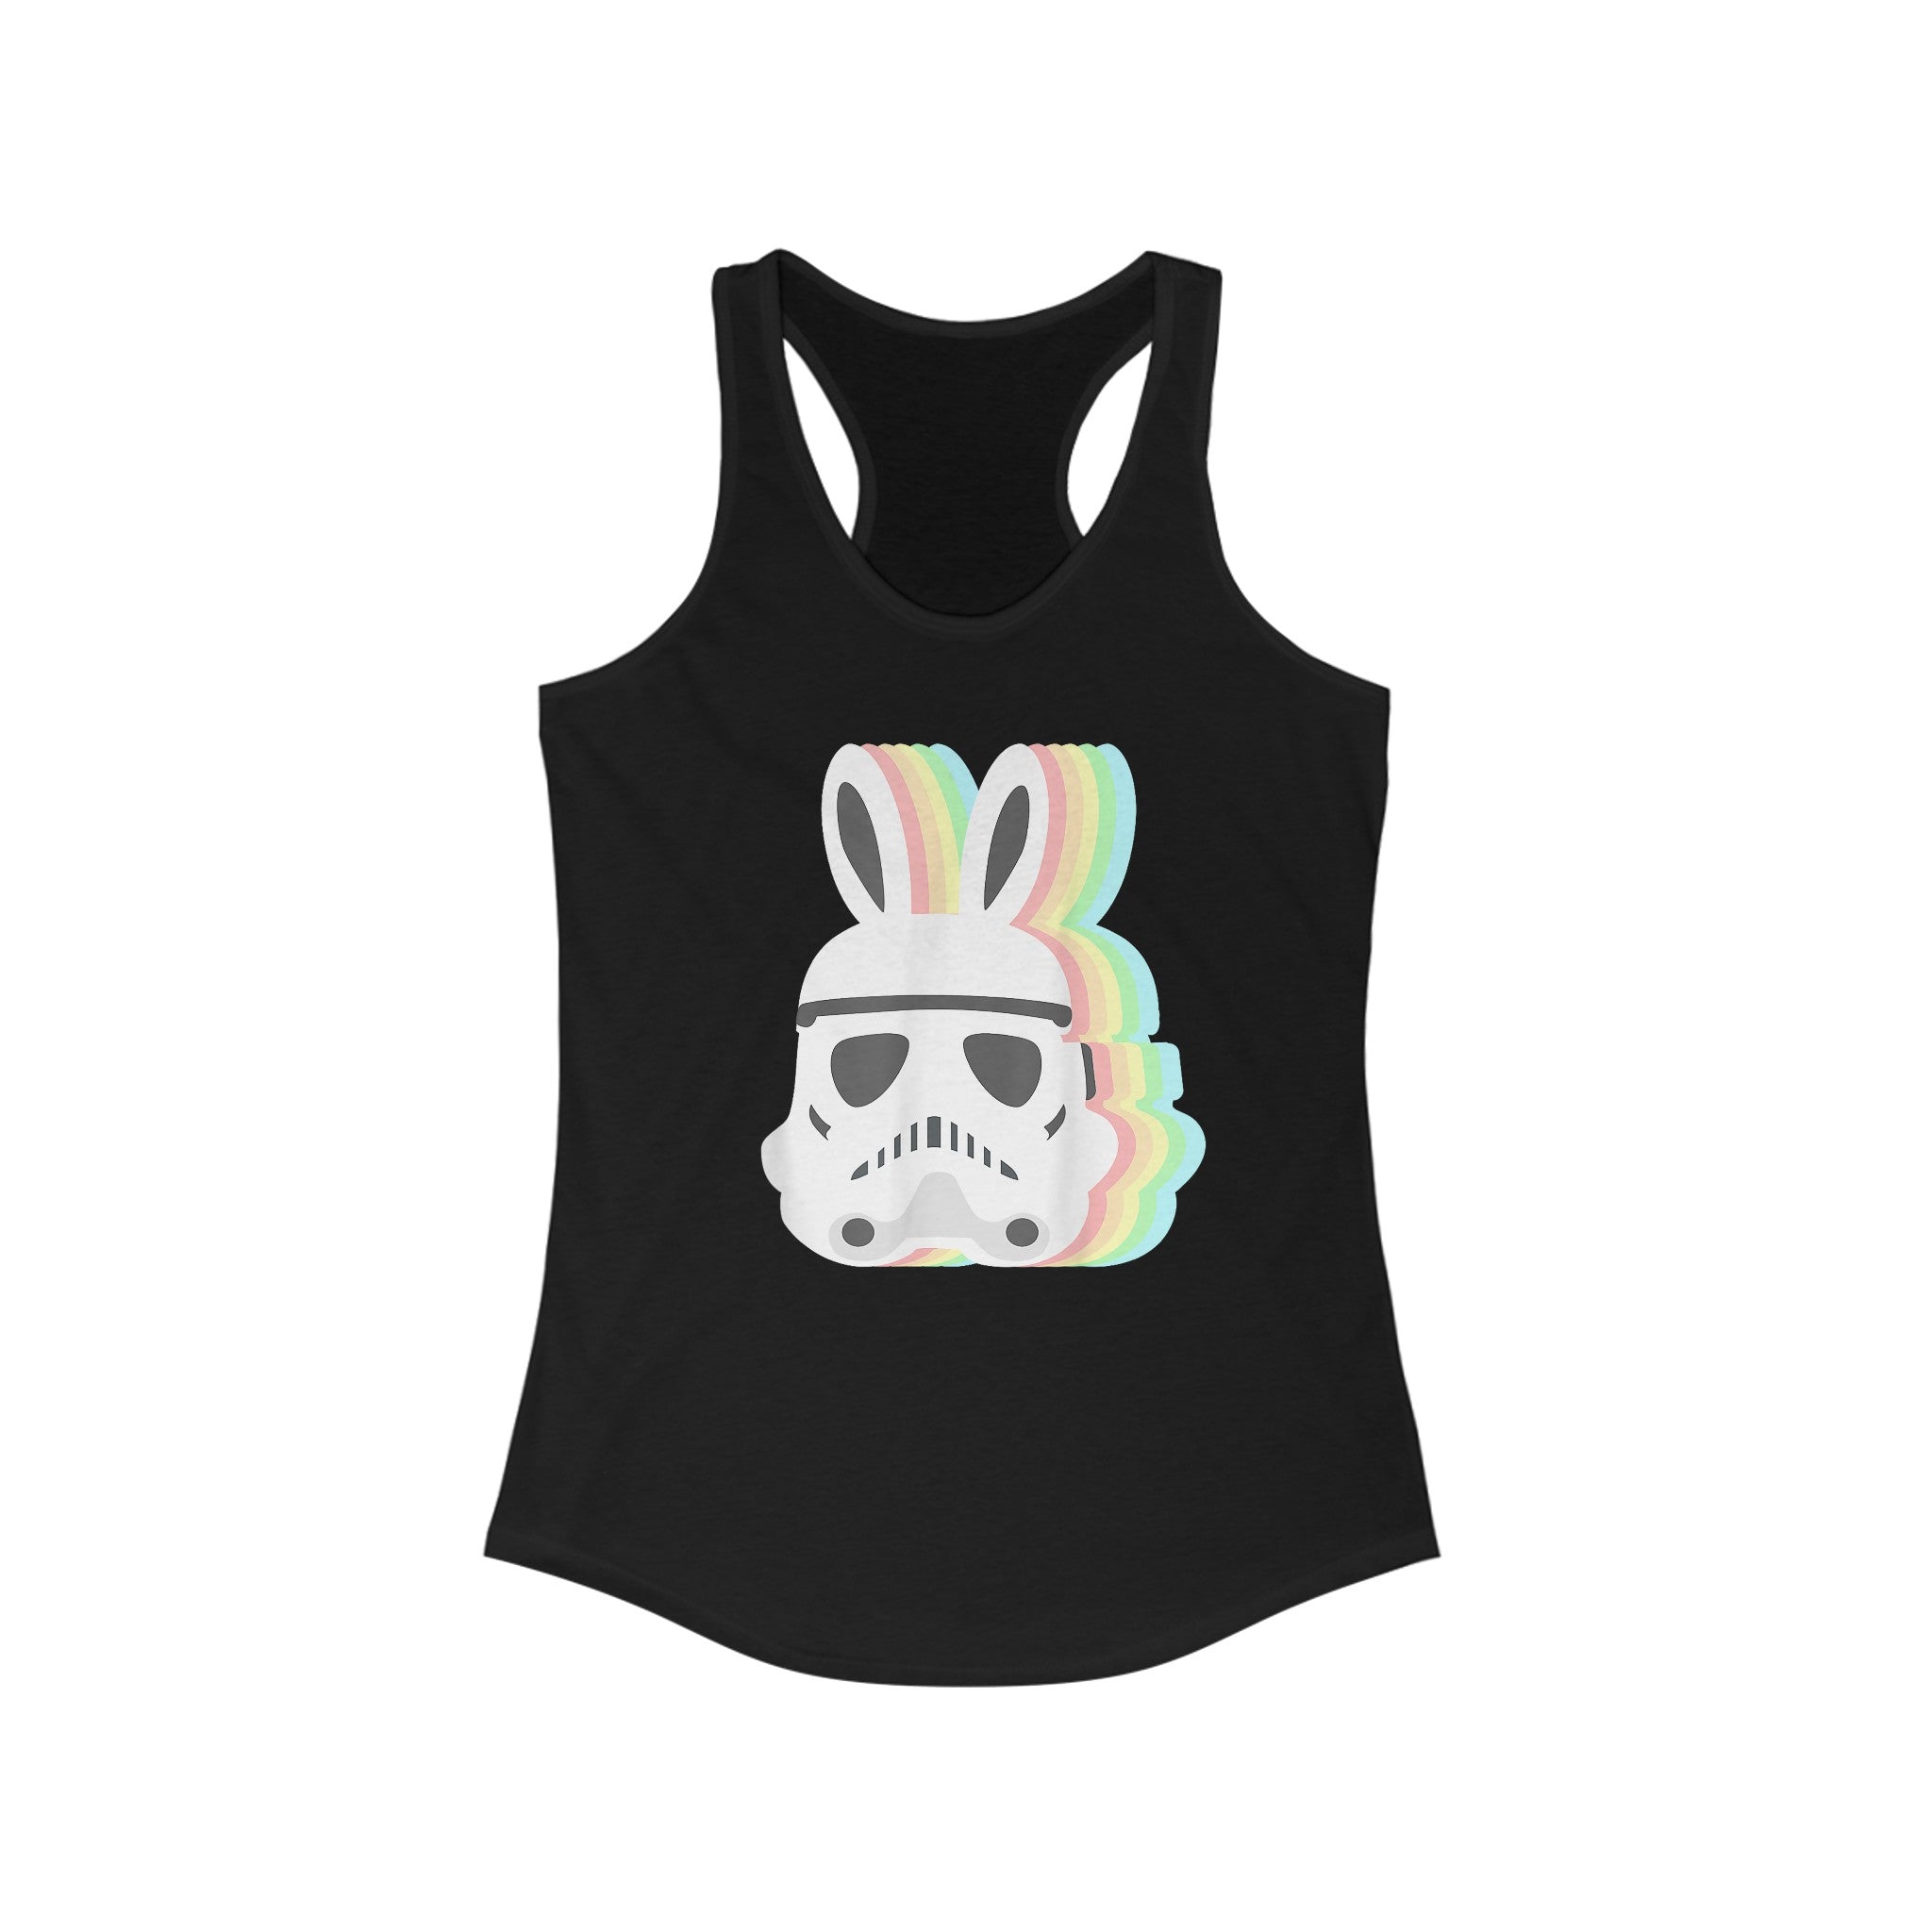 This Star Wars Easter Stormtrooper - Women's Racerback Tank features a Star Wars design with a playful twist: a Stormtrooper helmet adorned with rainbow-colored bunny ears, perfect for an Easter-themed outfit.